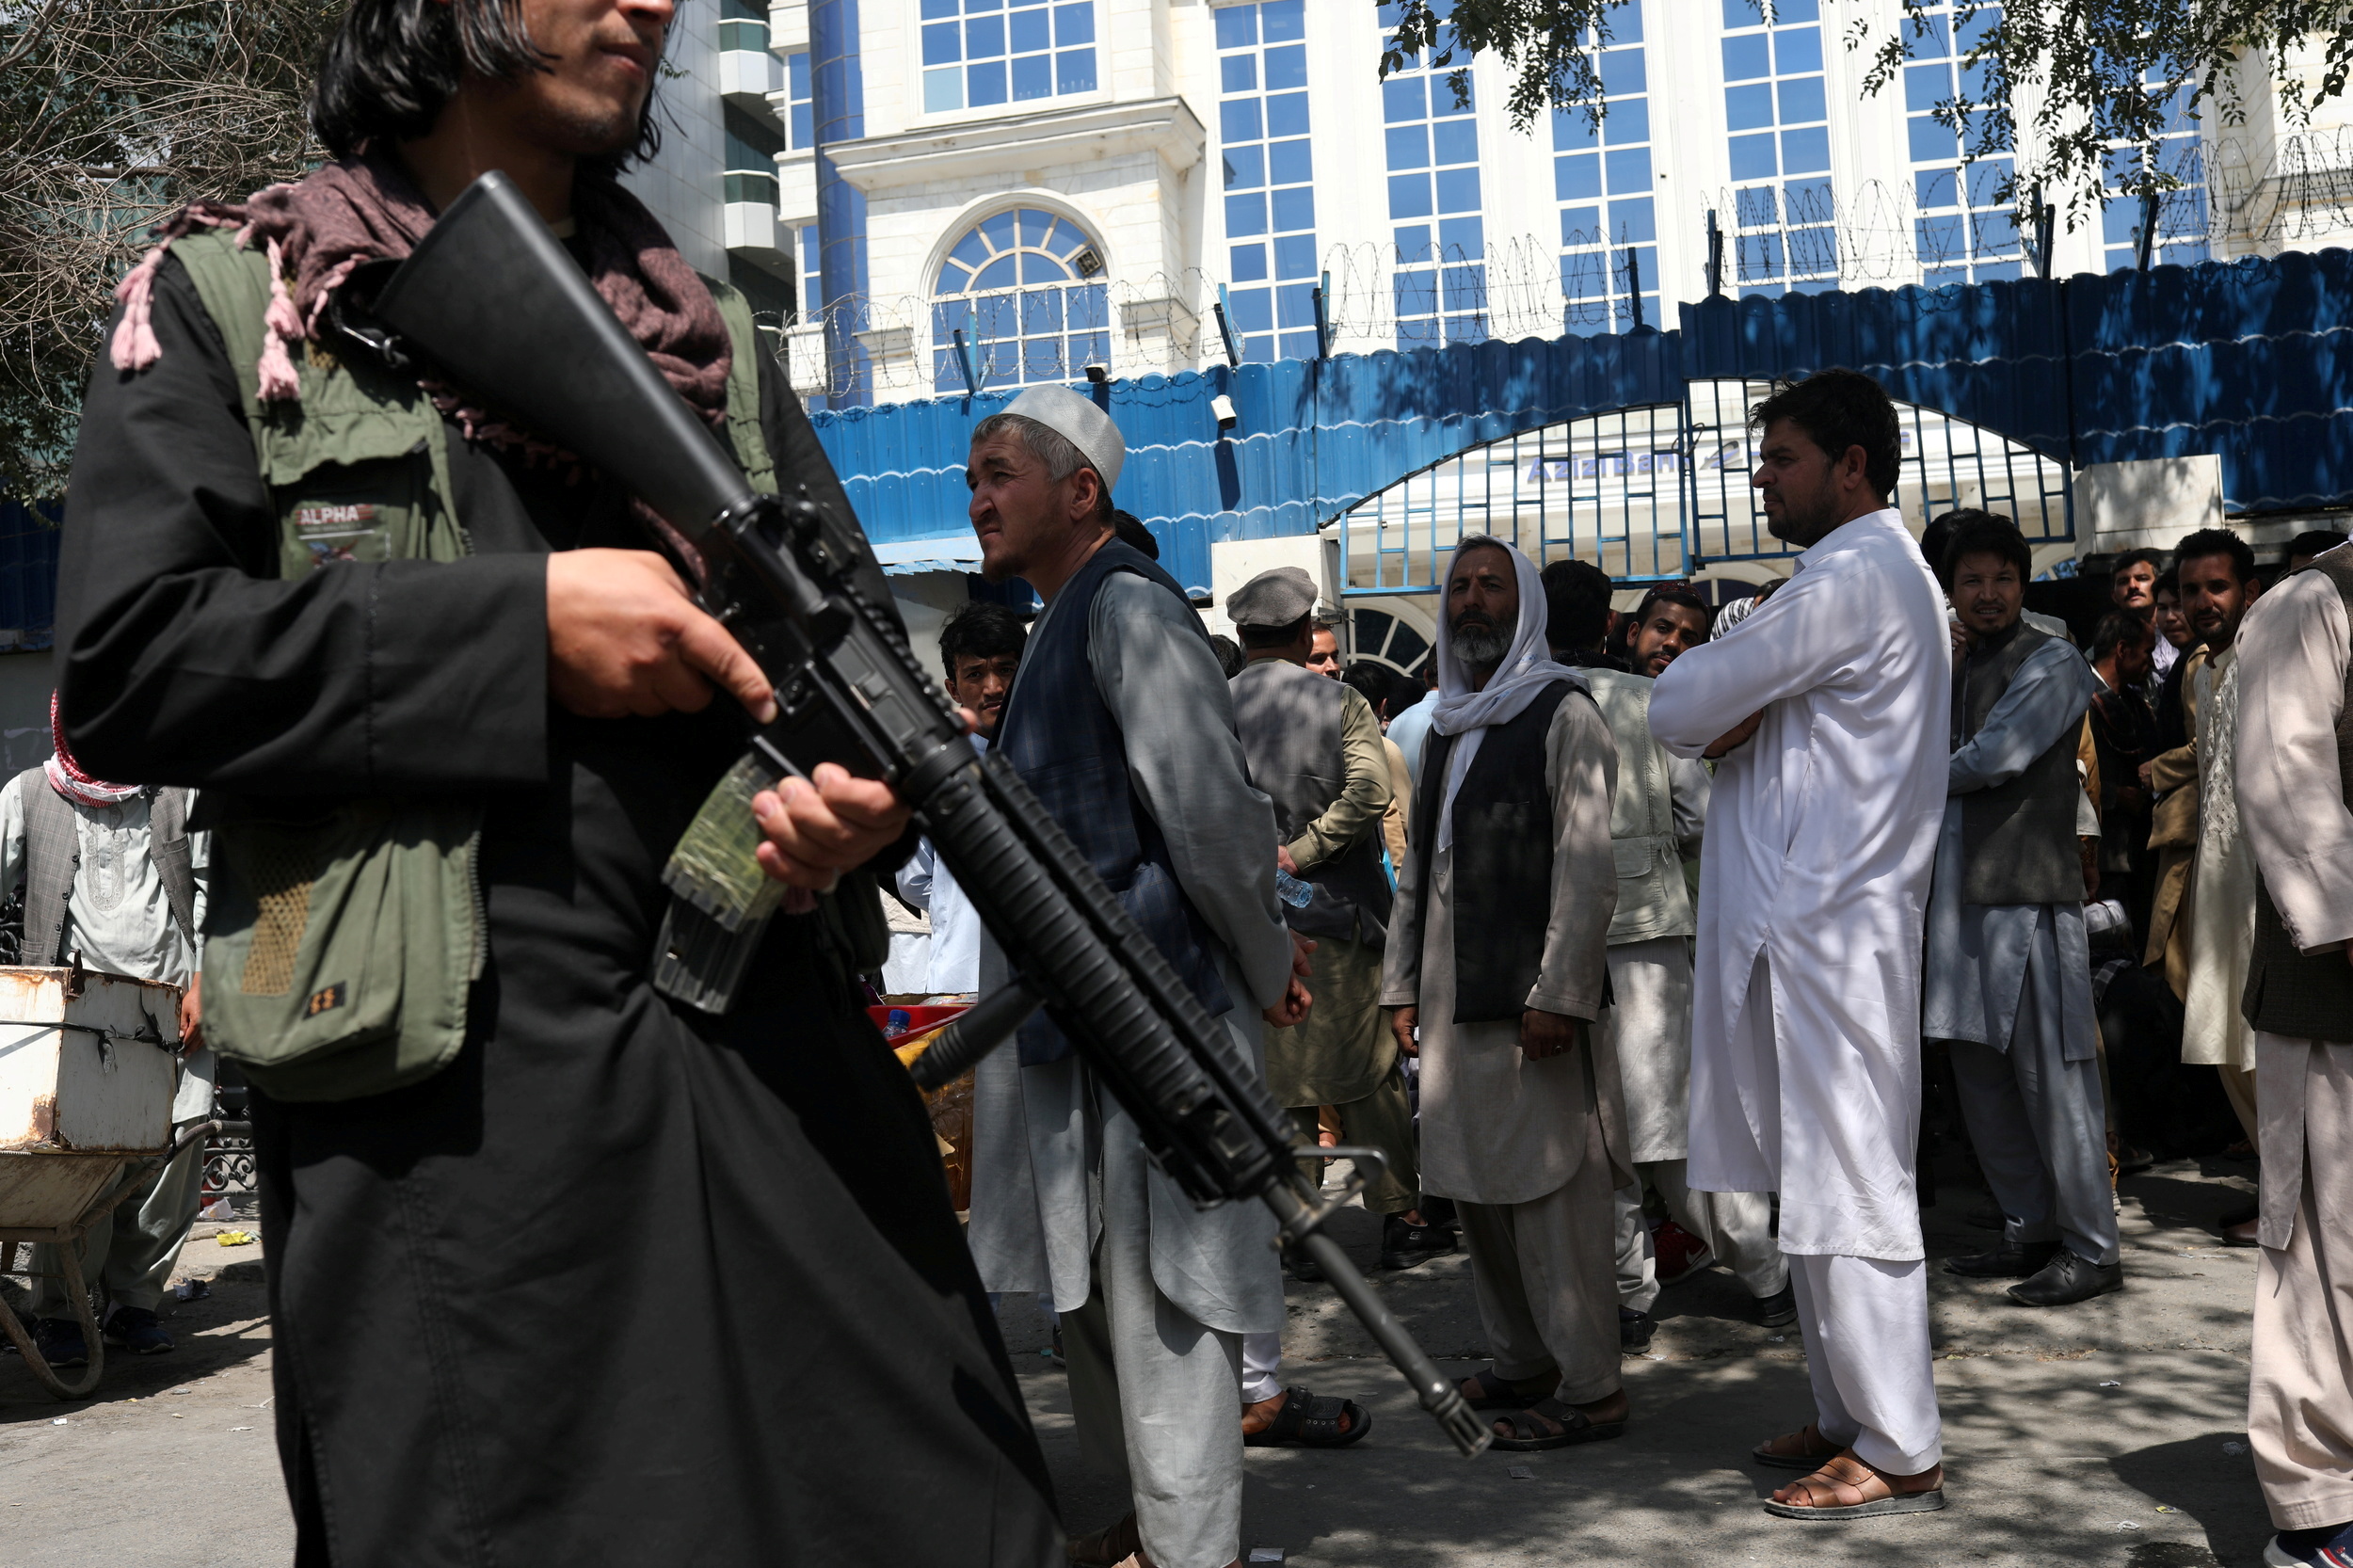 A Taliban security member holding a rifle ensures order in front of Azizi Bank in Kabul